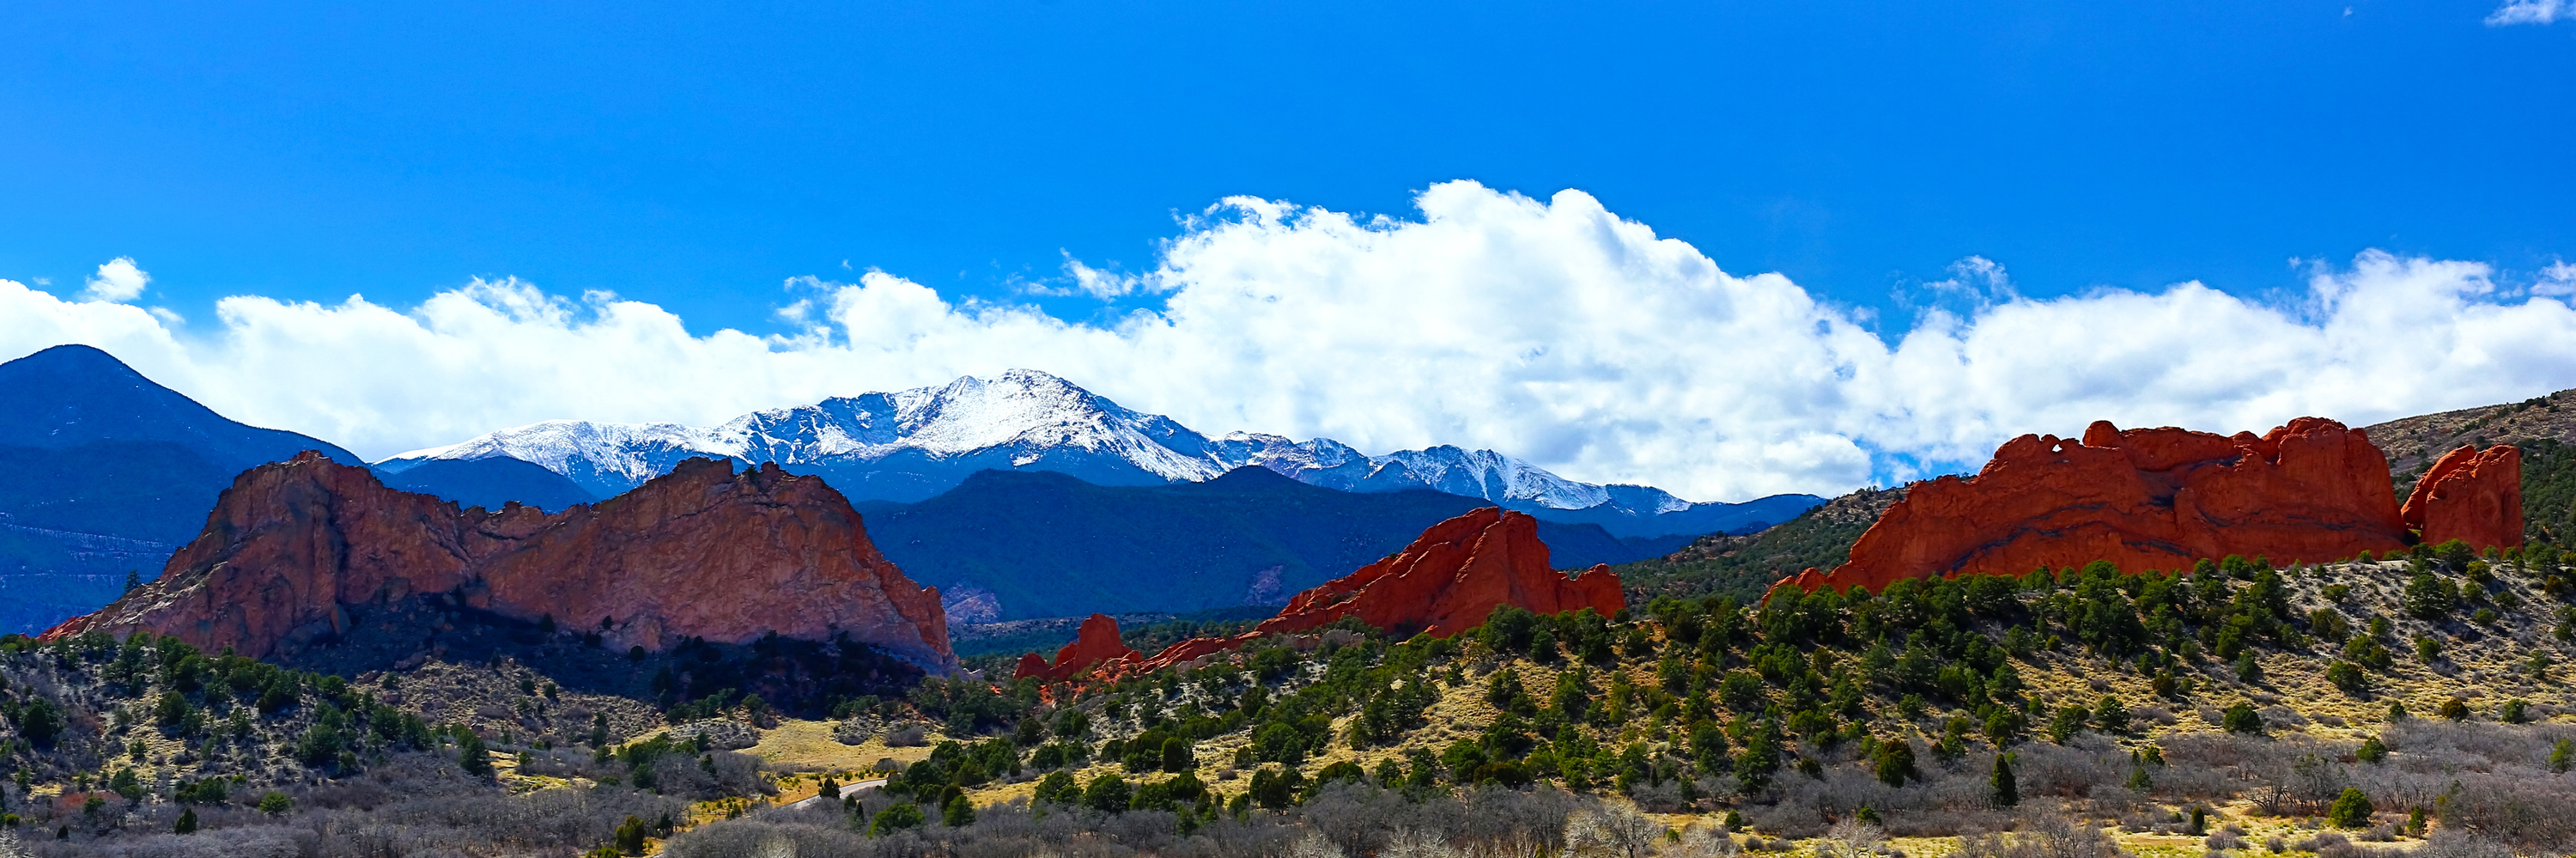 Pikes Peak and Garden of the Gods at Colorado Springs